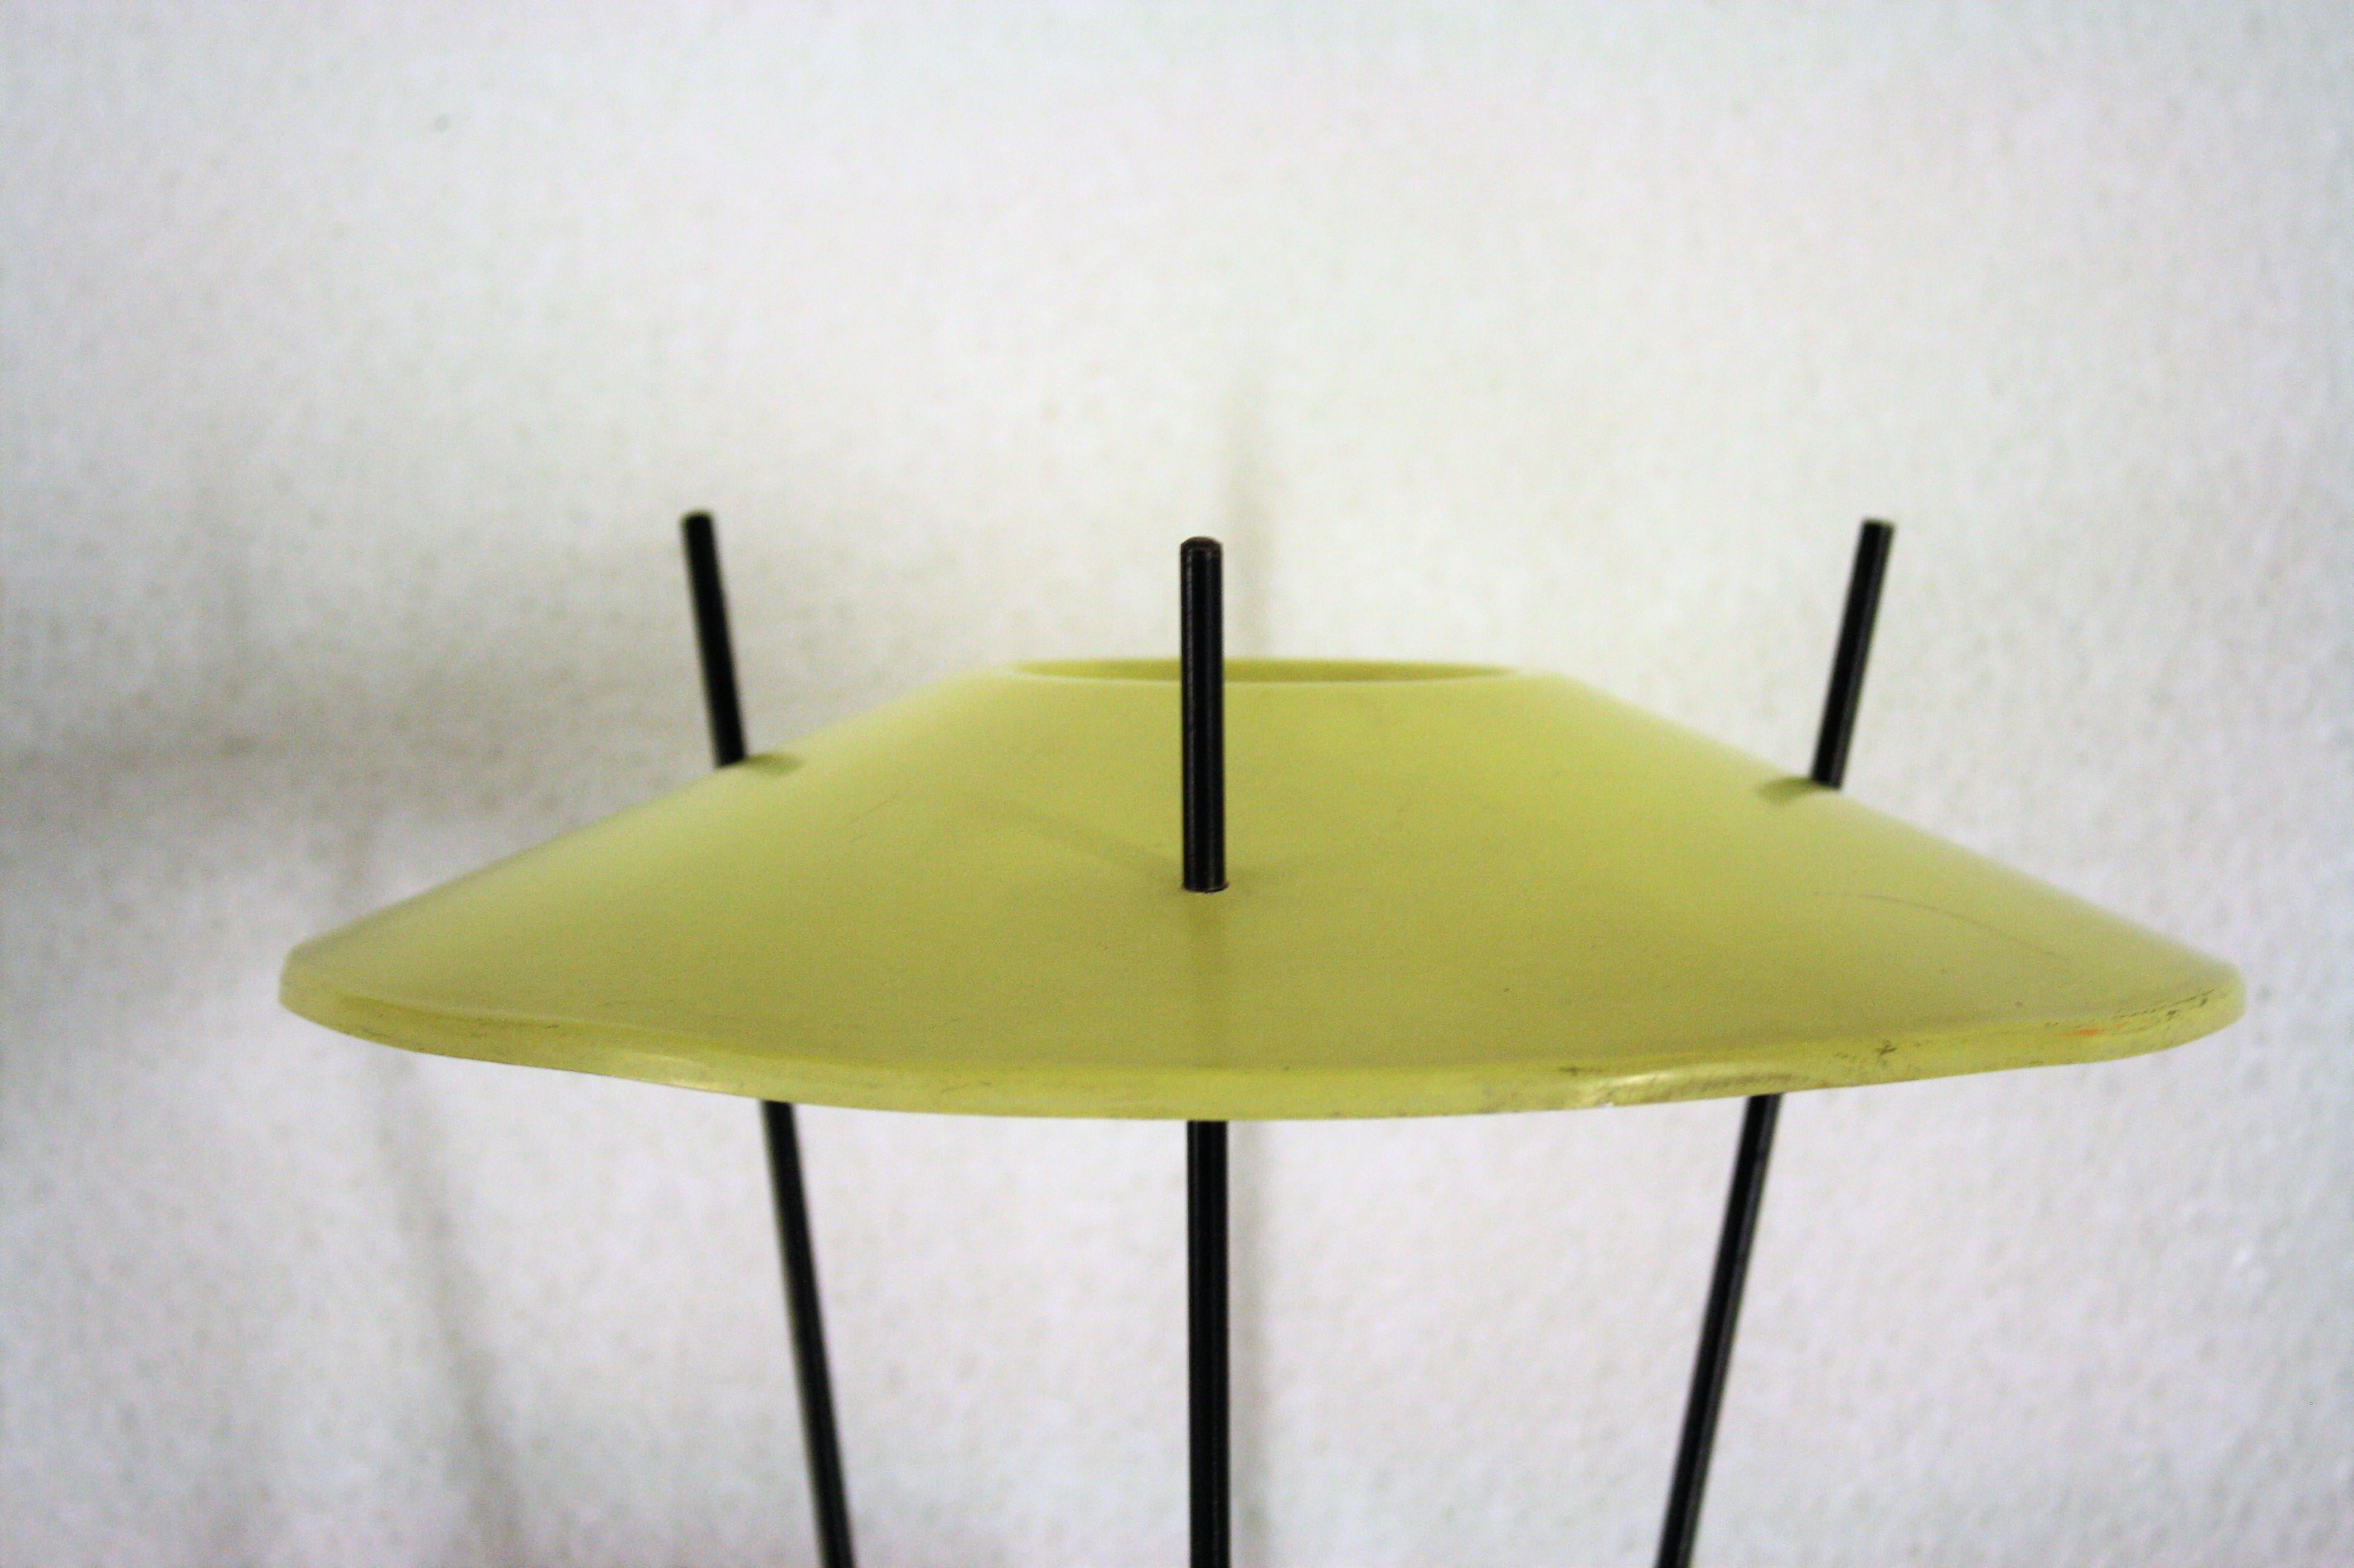 Rare atomic design midcentury table lamp.

The lamp features a yellow enameled shade mounted on a smart designed black metal base and the original blown glass hurricane shade.

Although no specific designer has been found, this lamp is a rare